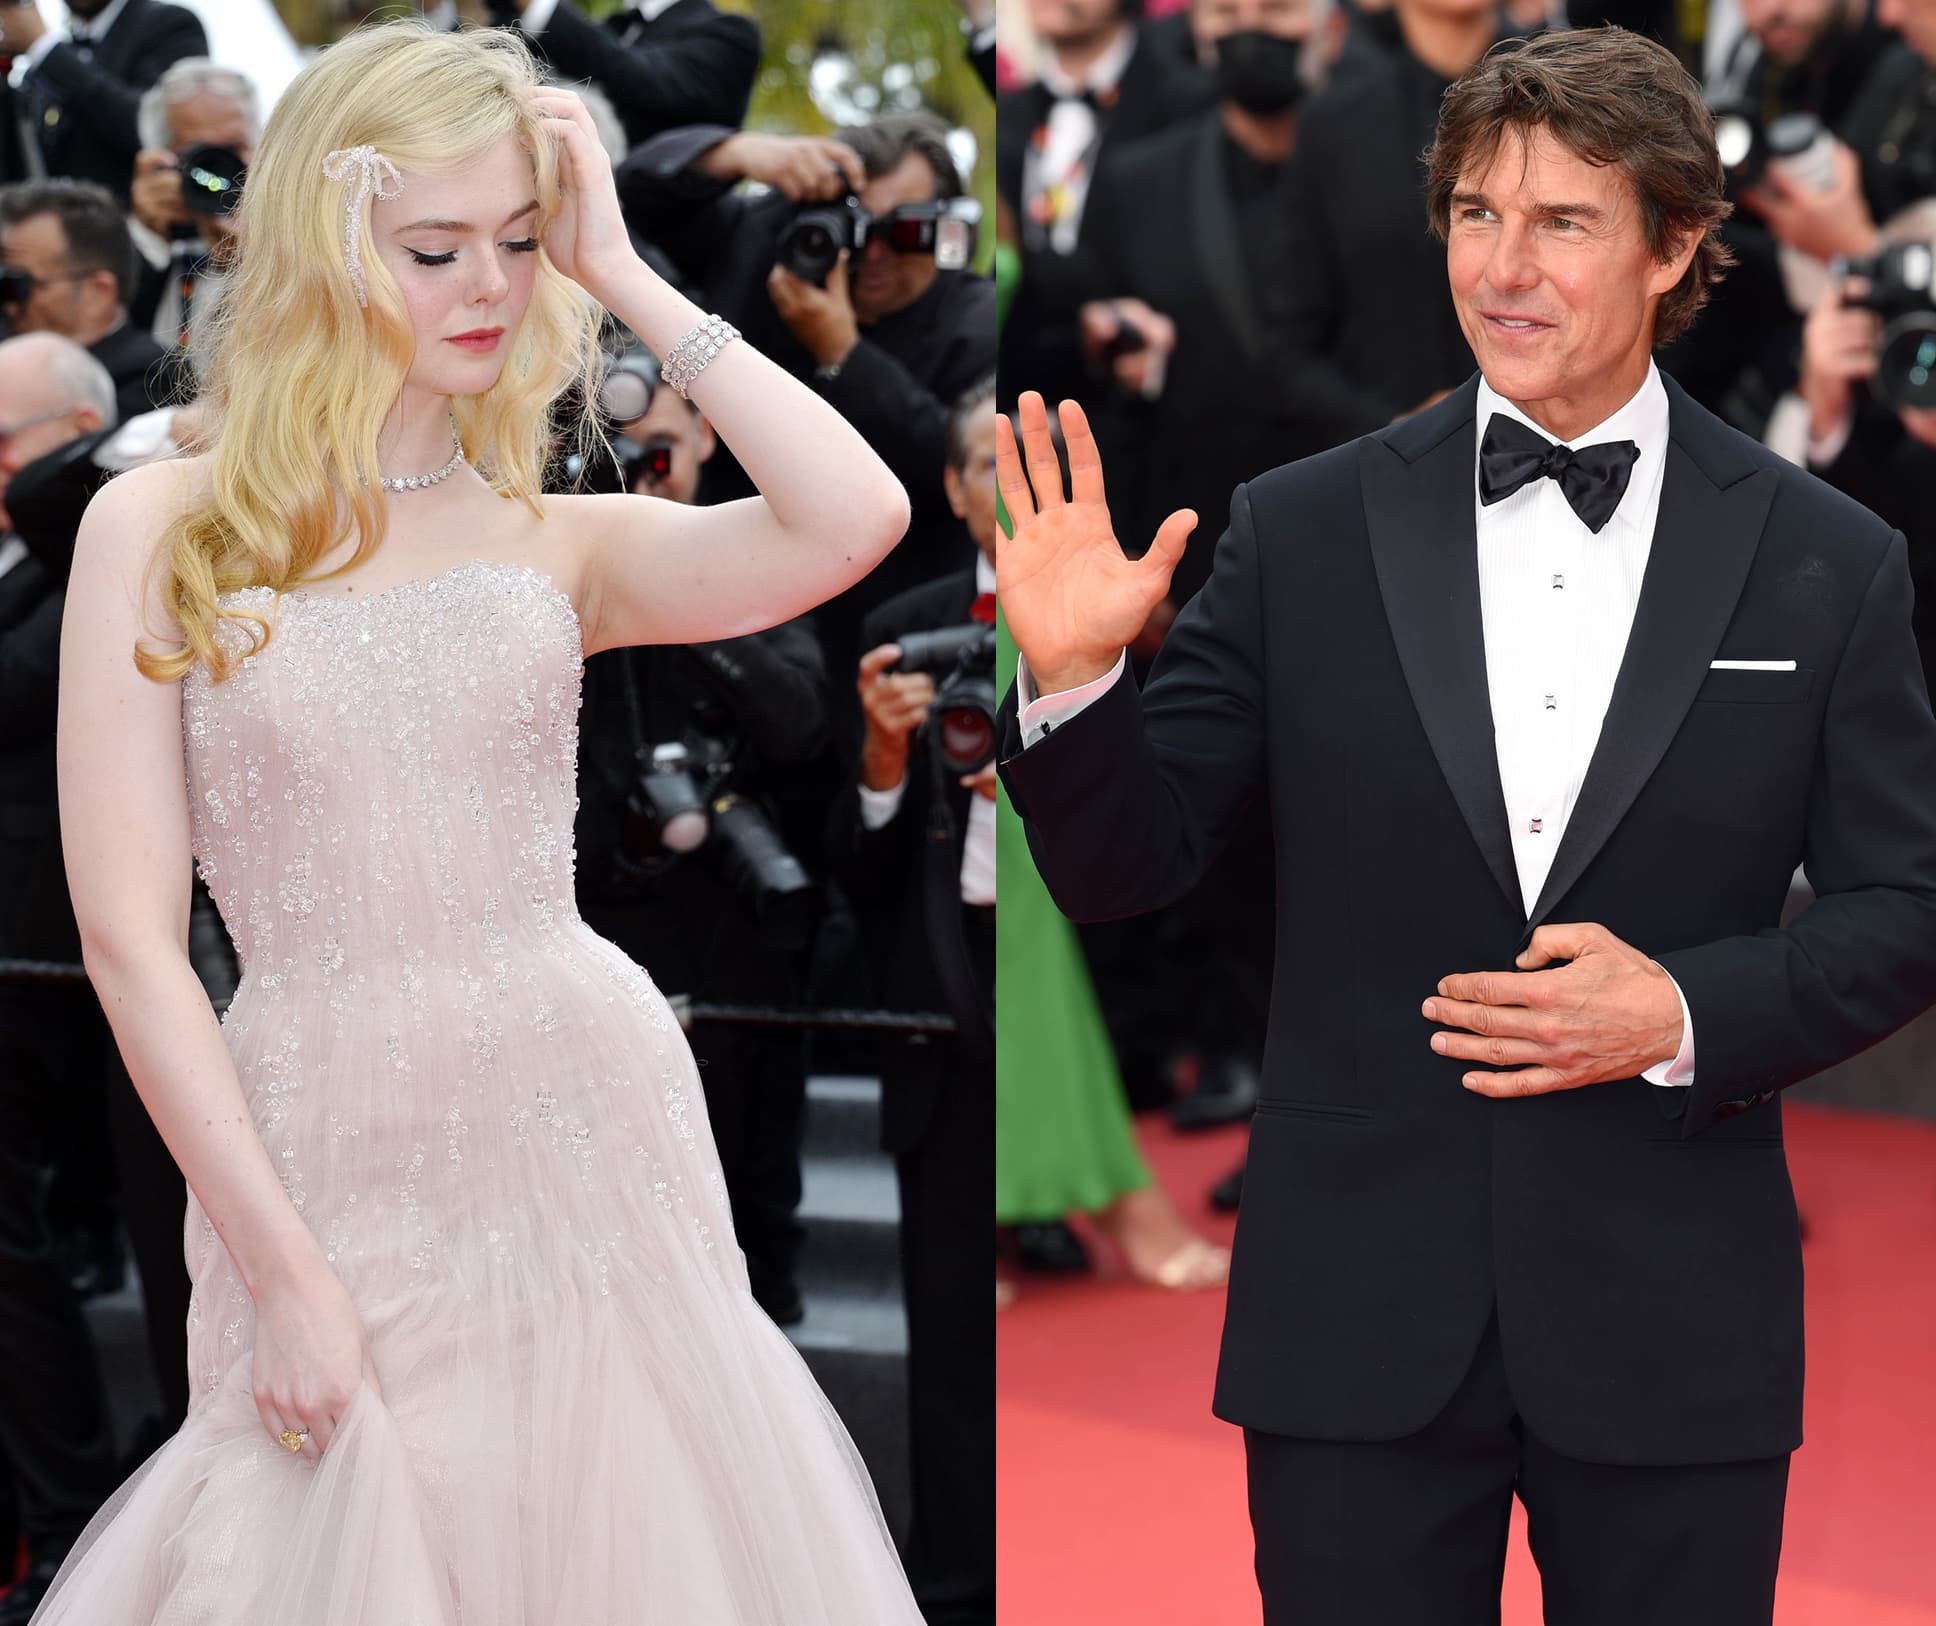 Elle Fanning receives a compliment from Tom Cruise during his speech ahead of the Cannes Film Festival premiere of Top Gun: Maverick